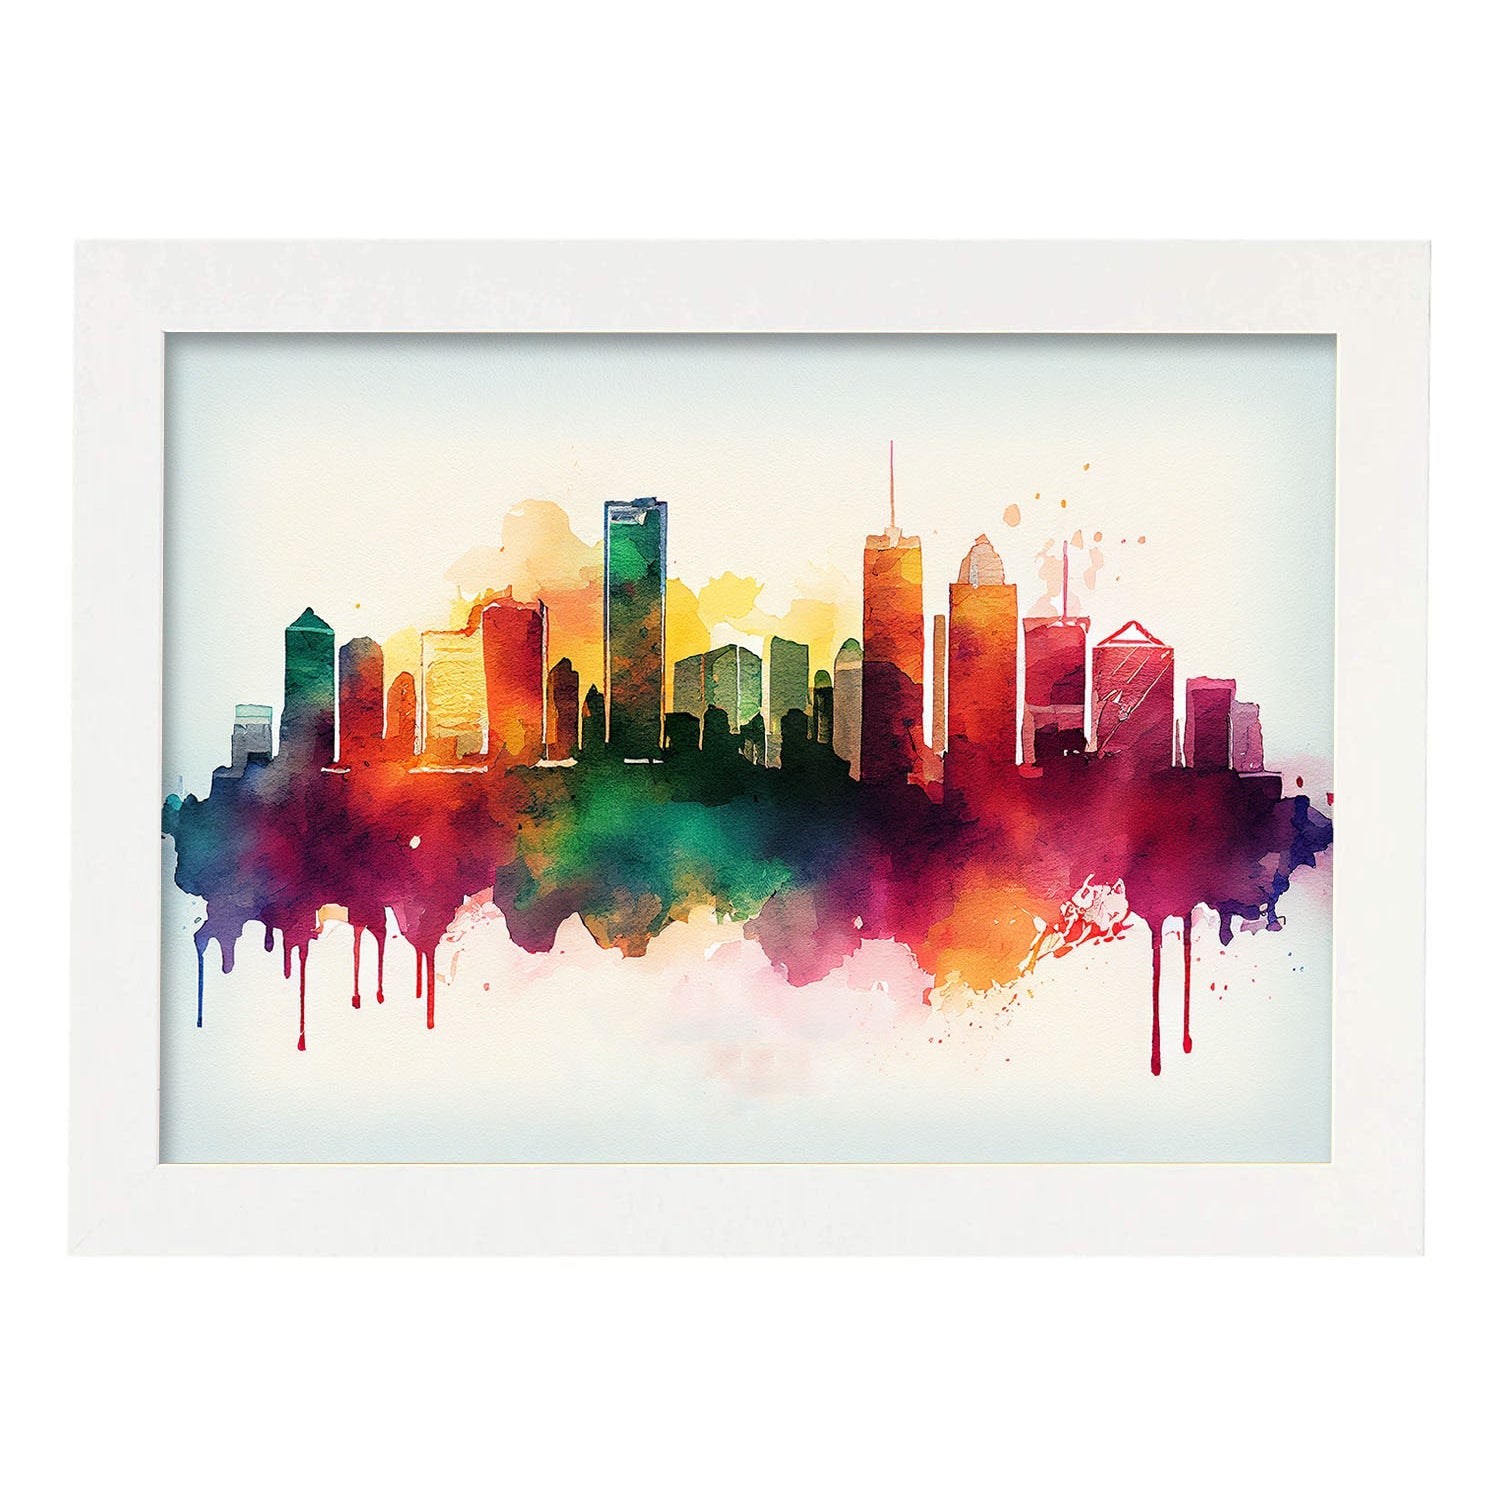 Nacnic watercolor of a skyline of the city of Miami_2. Aesthetic Wall Art Prints for Bedroom or Living Room Design.-Artwork-Nacnic-A4-Marco Blanco-Nacnic Estudio SL